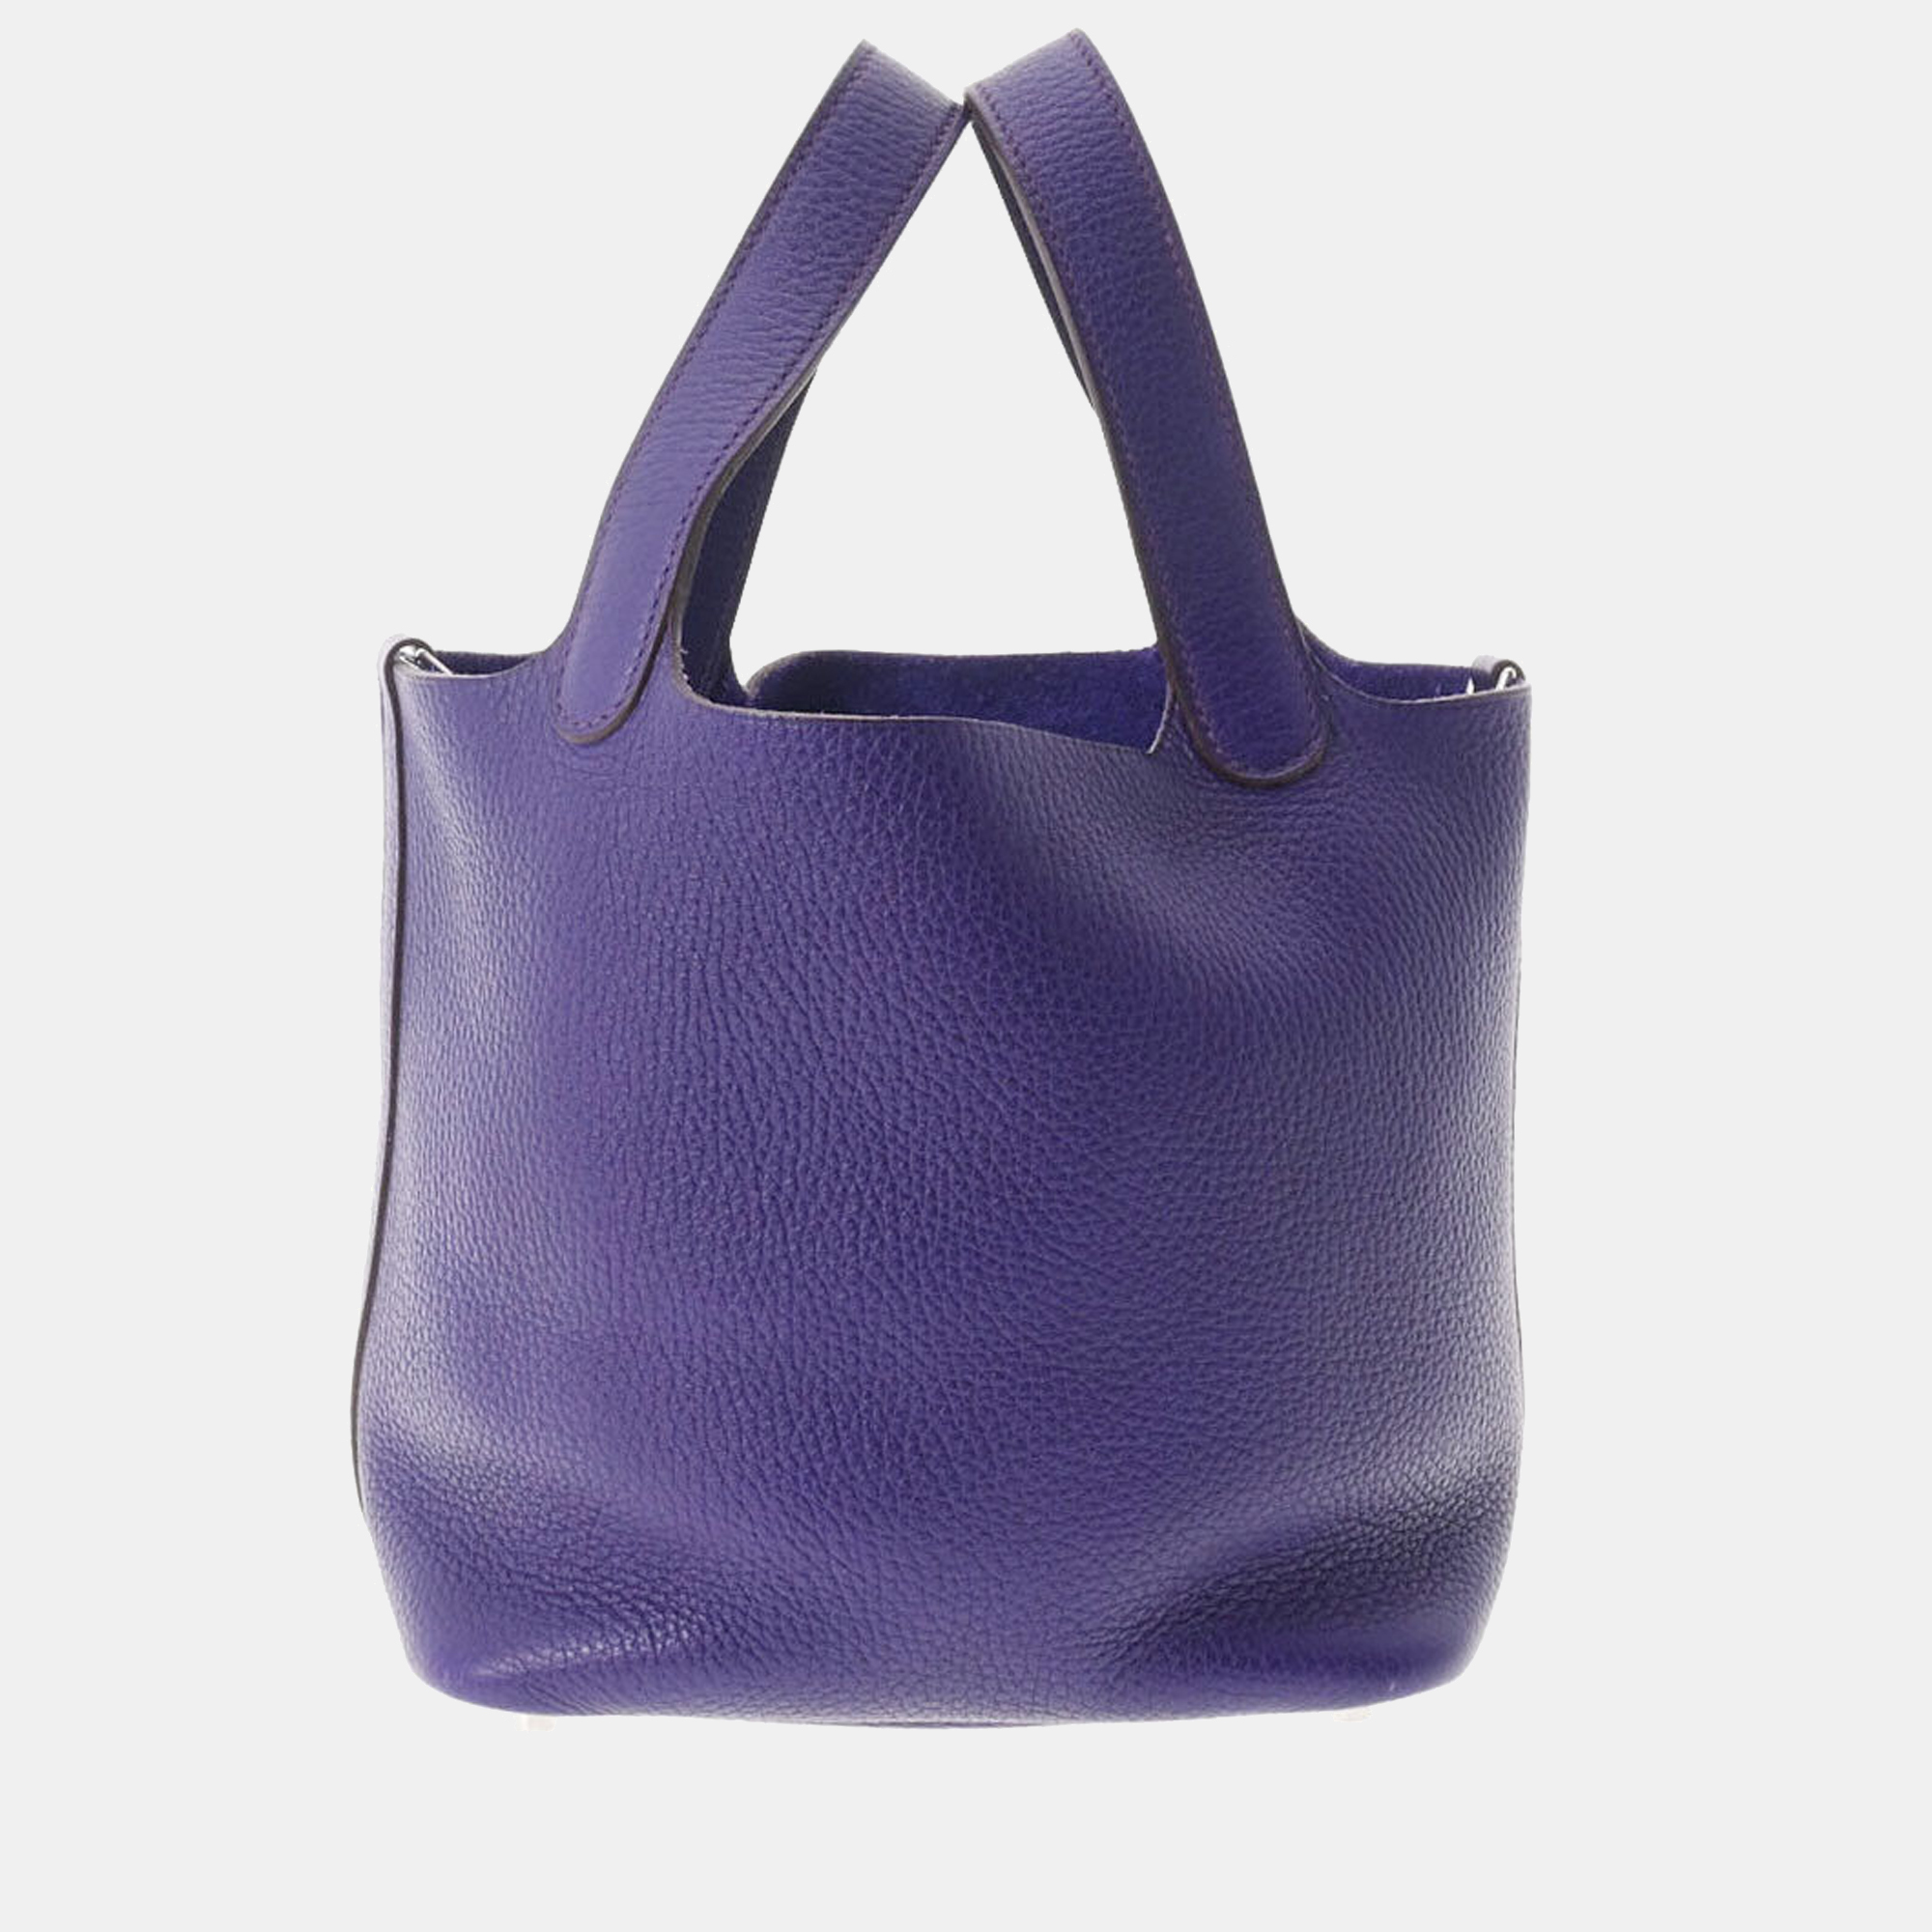 Hermes Purple Taurillon Clemence Leather Picotin Lock PM Tote Bag